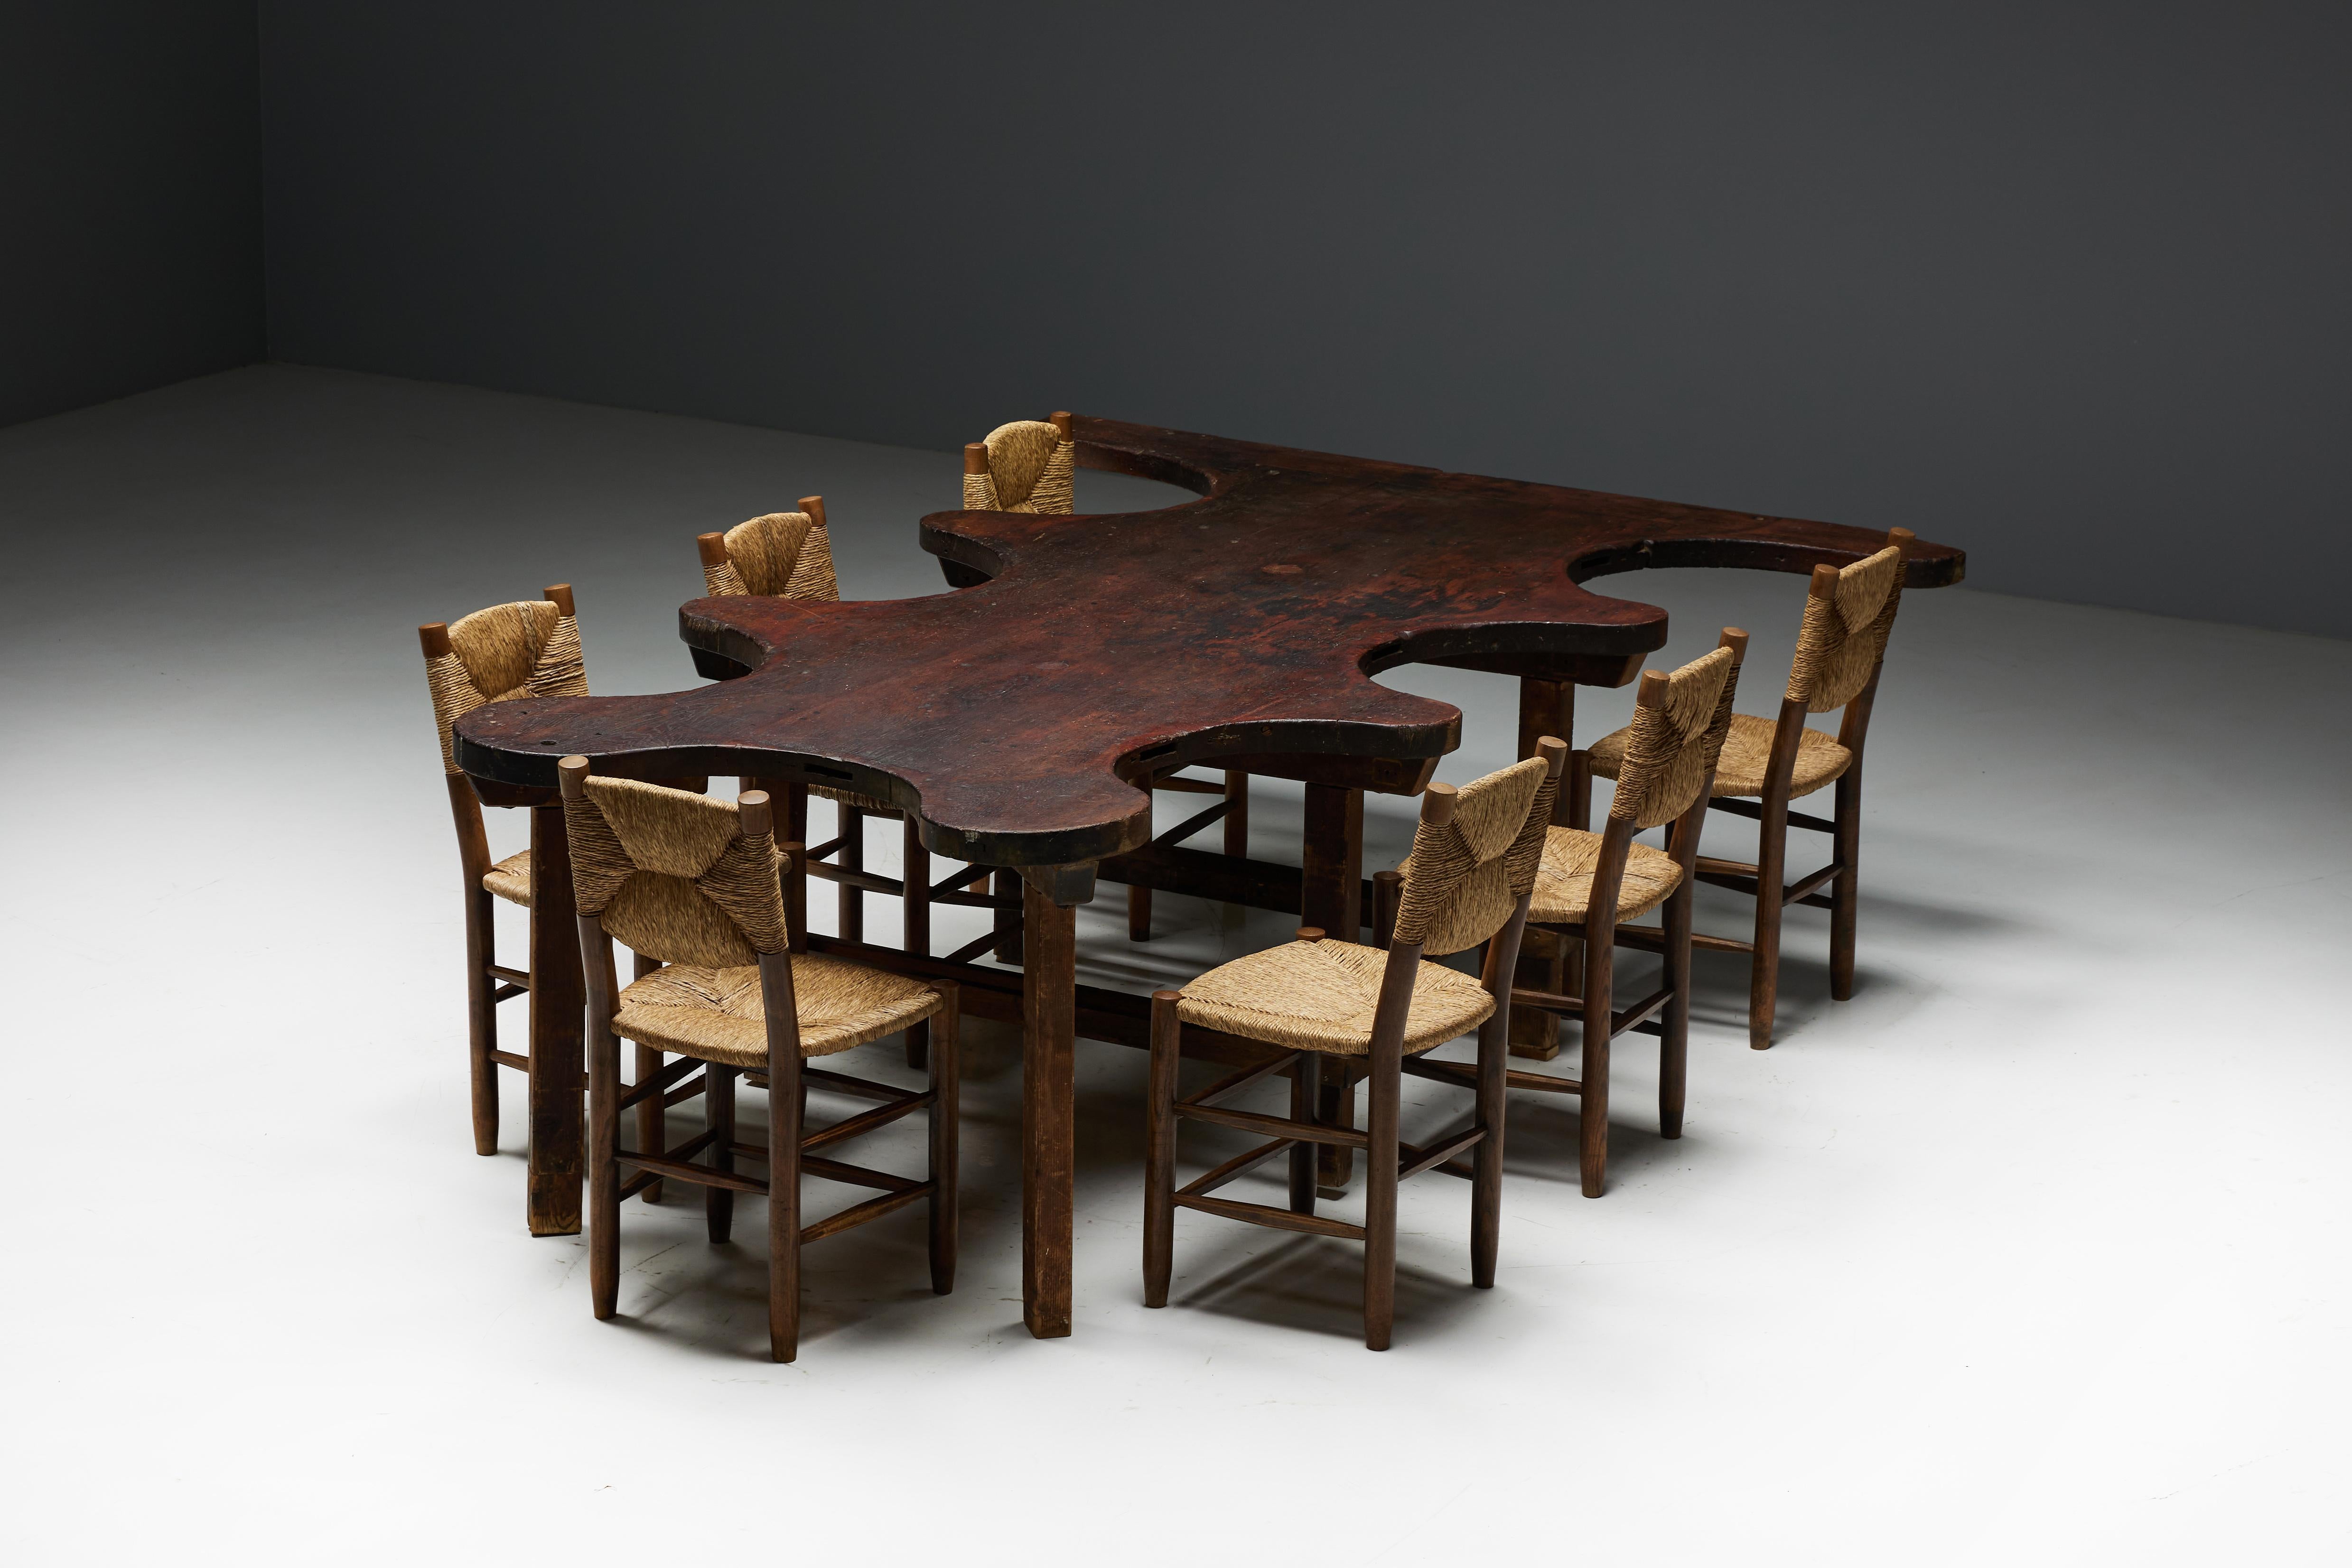 Rustic Free Form Organic Table, France, Late 19th Century For Sale 9